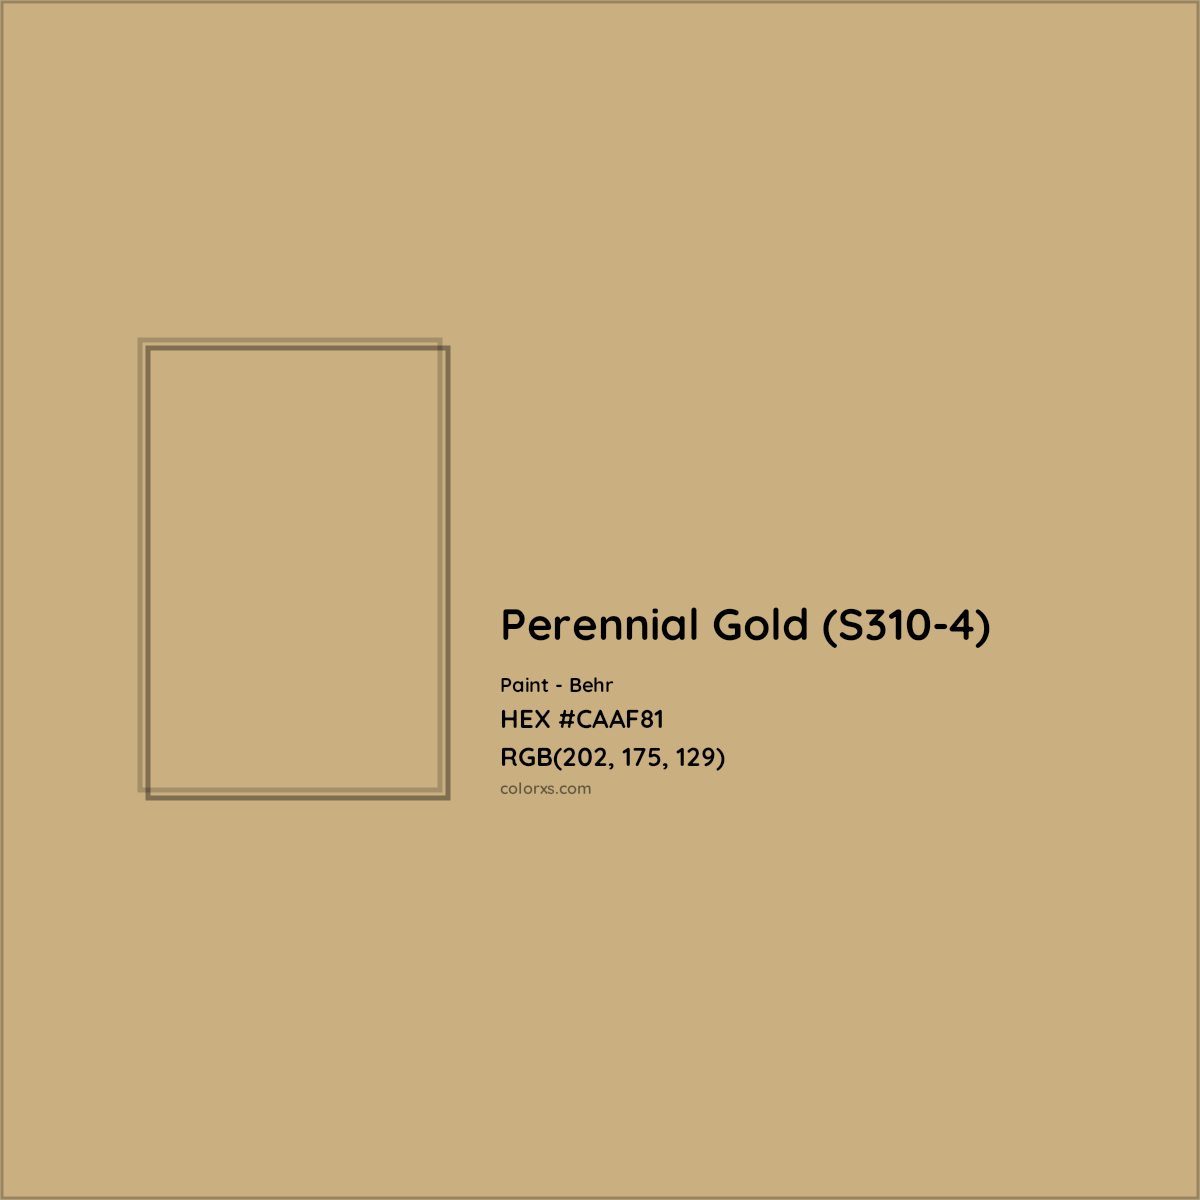 HEX #CAAF81 Perennial Gold (S310-4) Paint Behr - Color Code